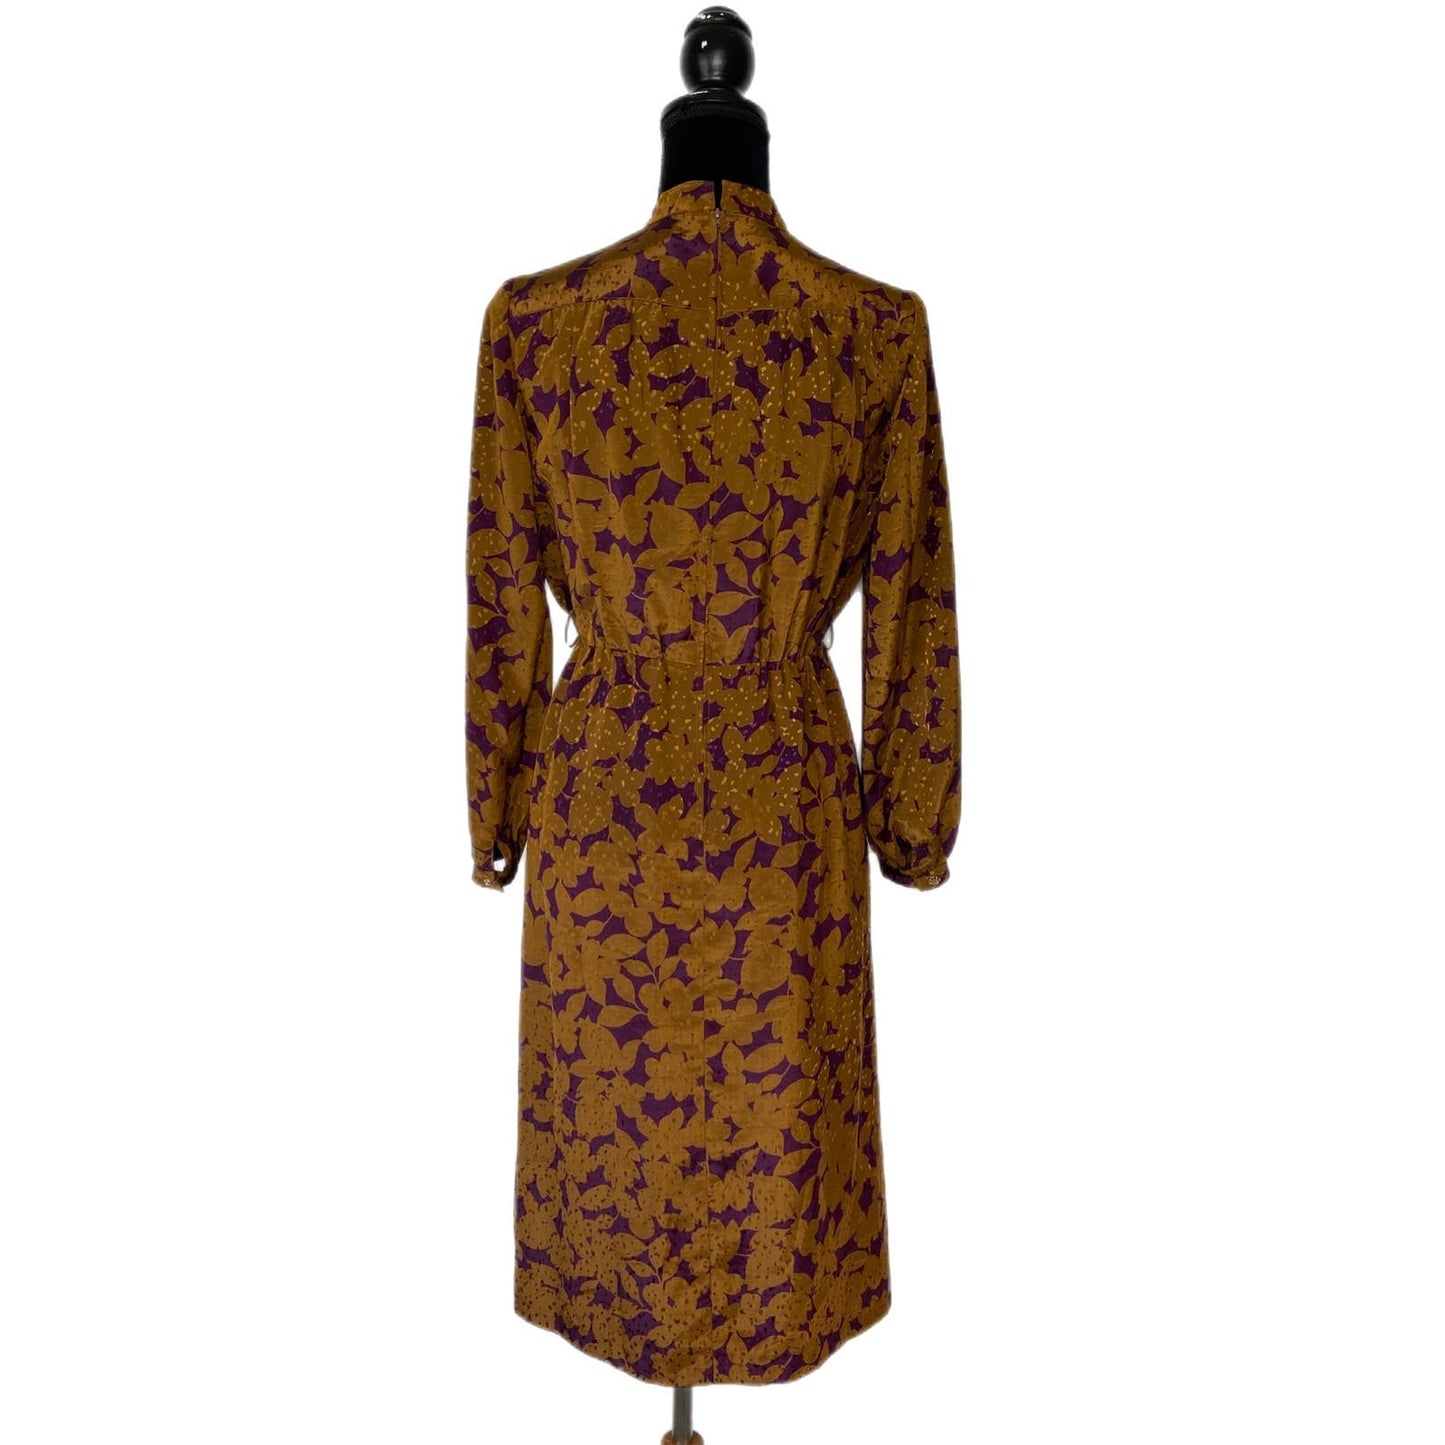 Vintage Floral Print Pleated Gold Fleck Dress - Women's Small